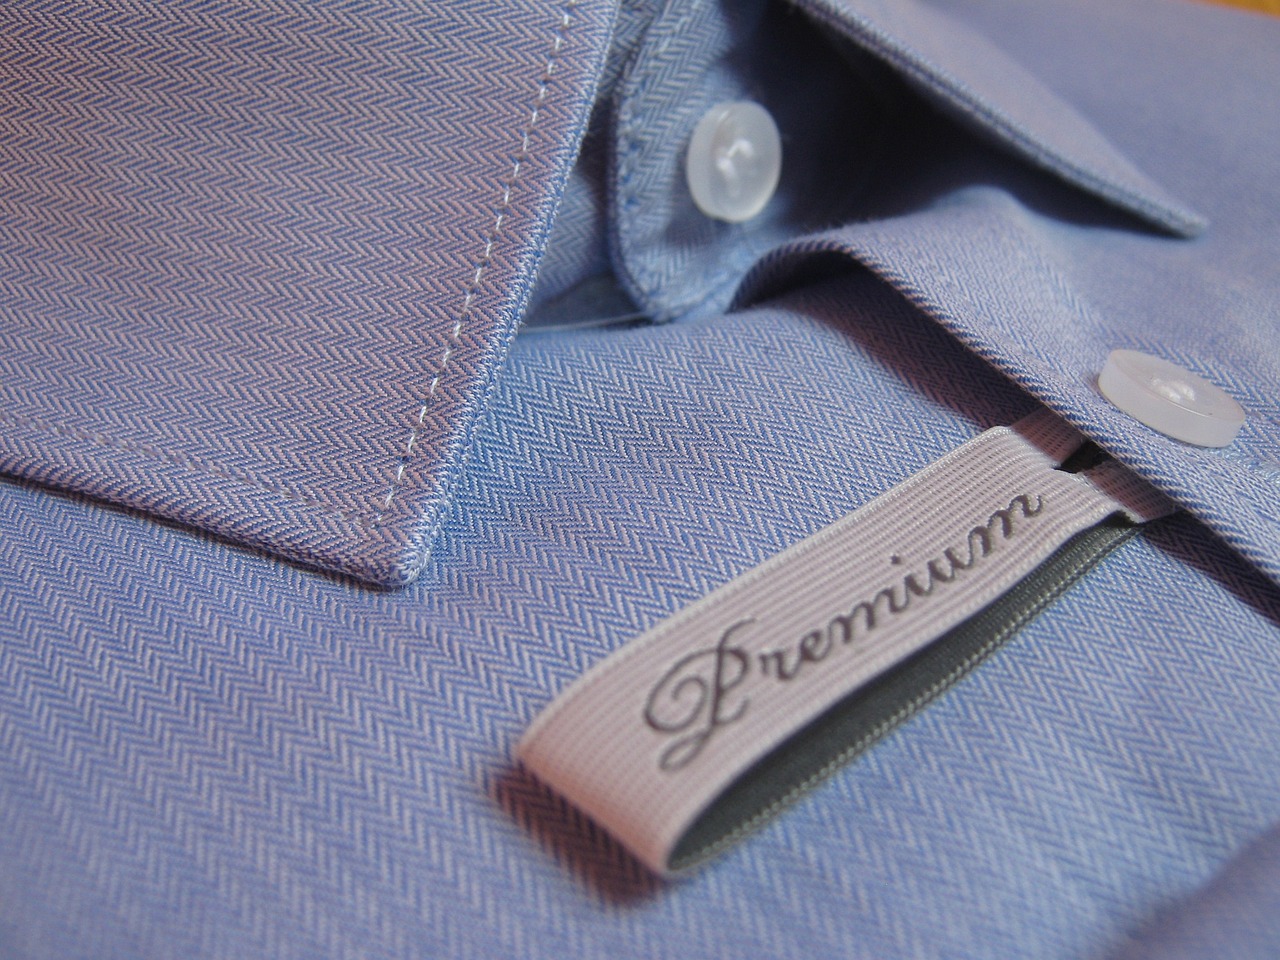 a close up of a label on a shirt, behance, purism, dress shirt and tie, photo realistic”, poseidon, ultrafine detail ”